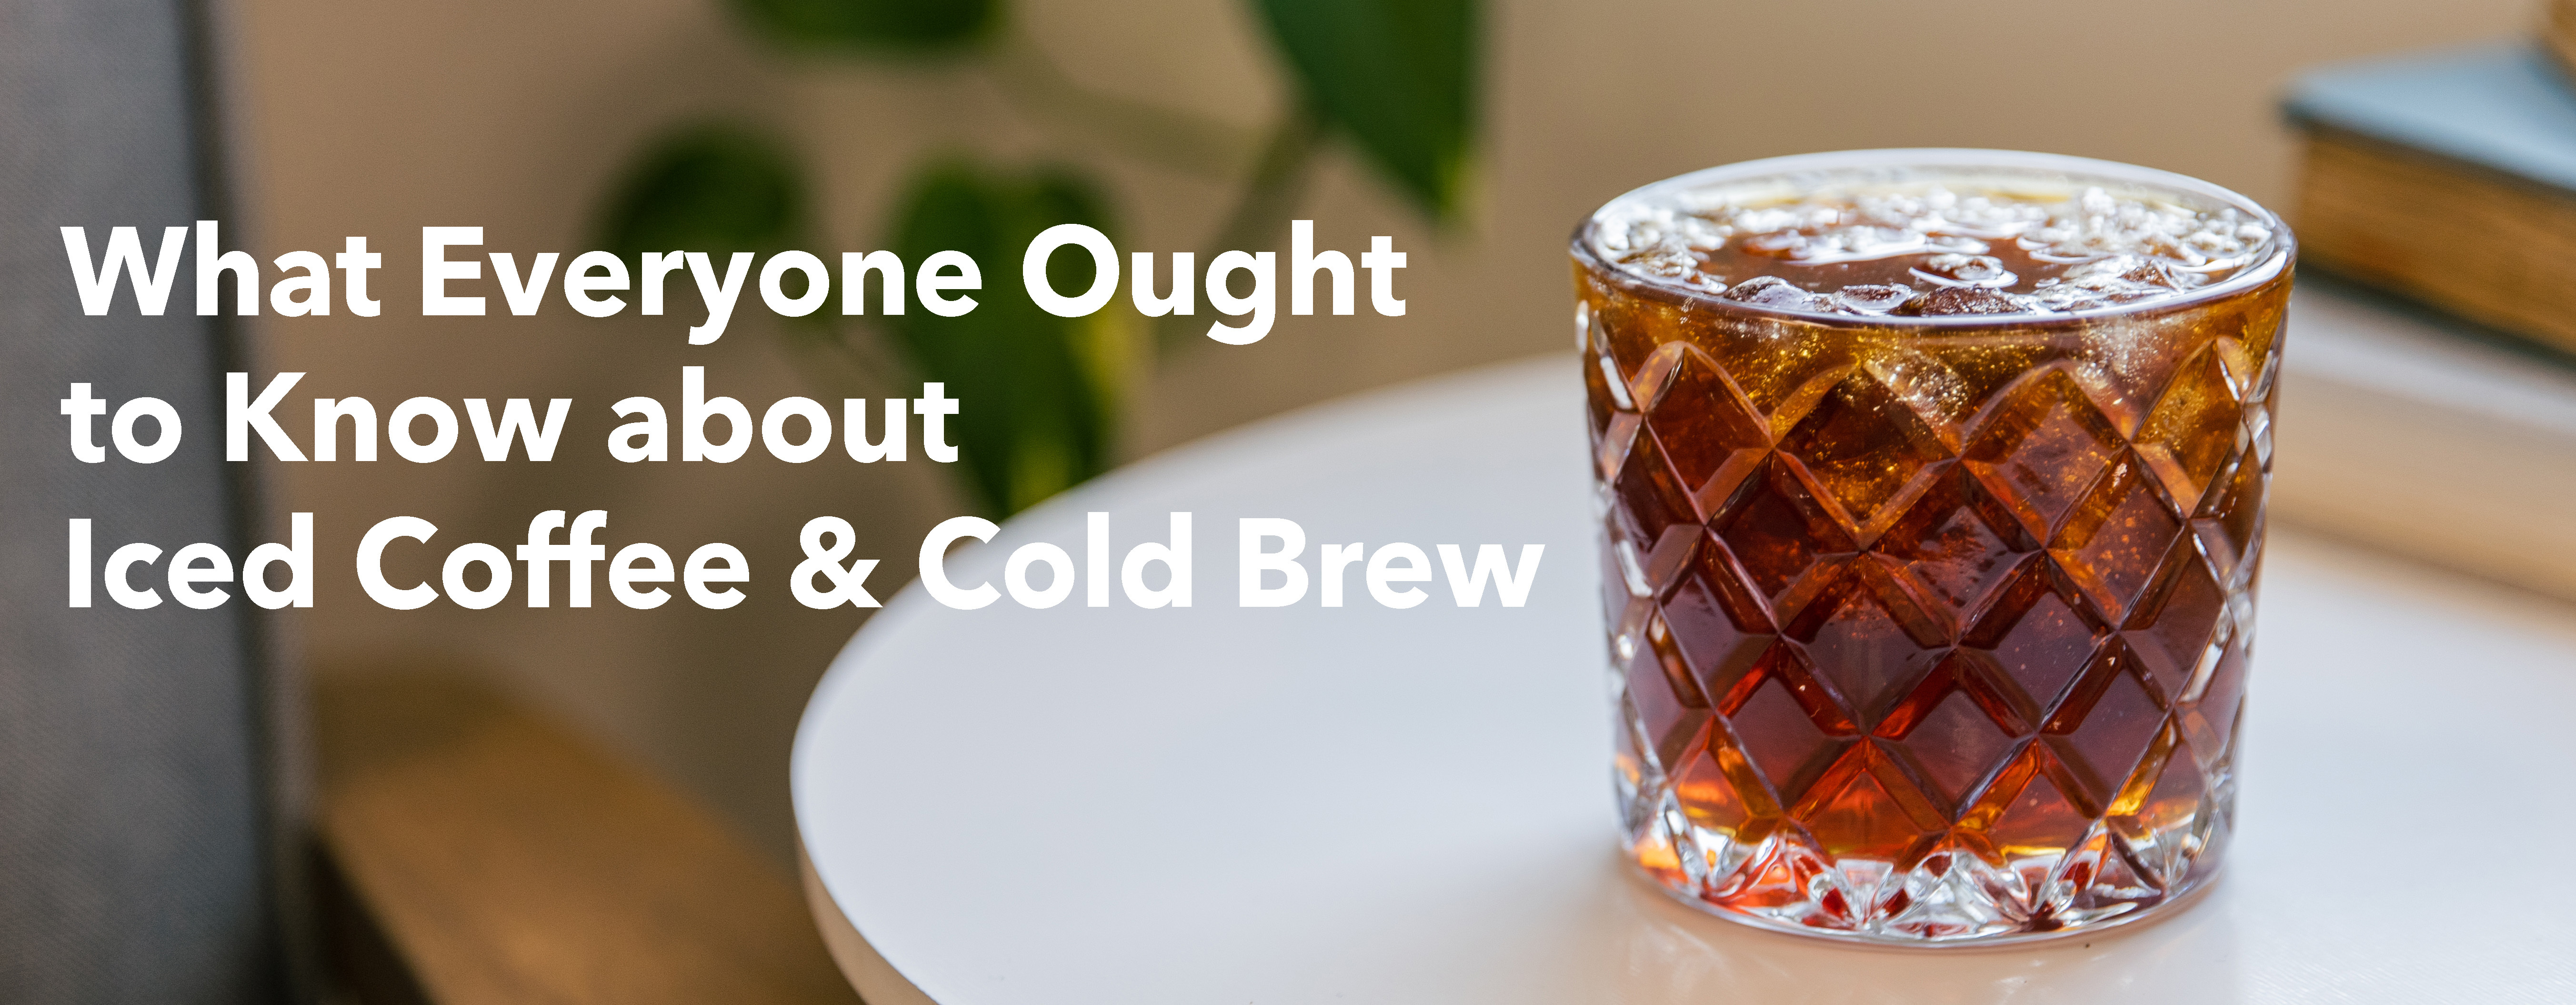 Who's Bad Cold Brew Cup [B]